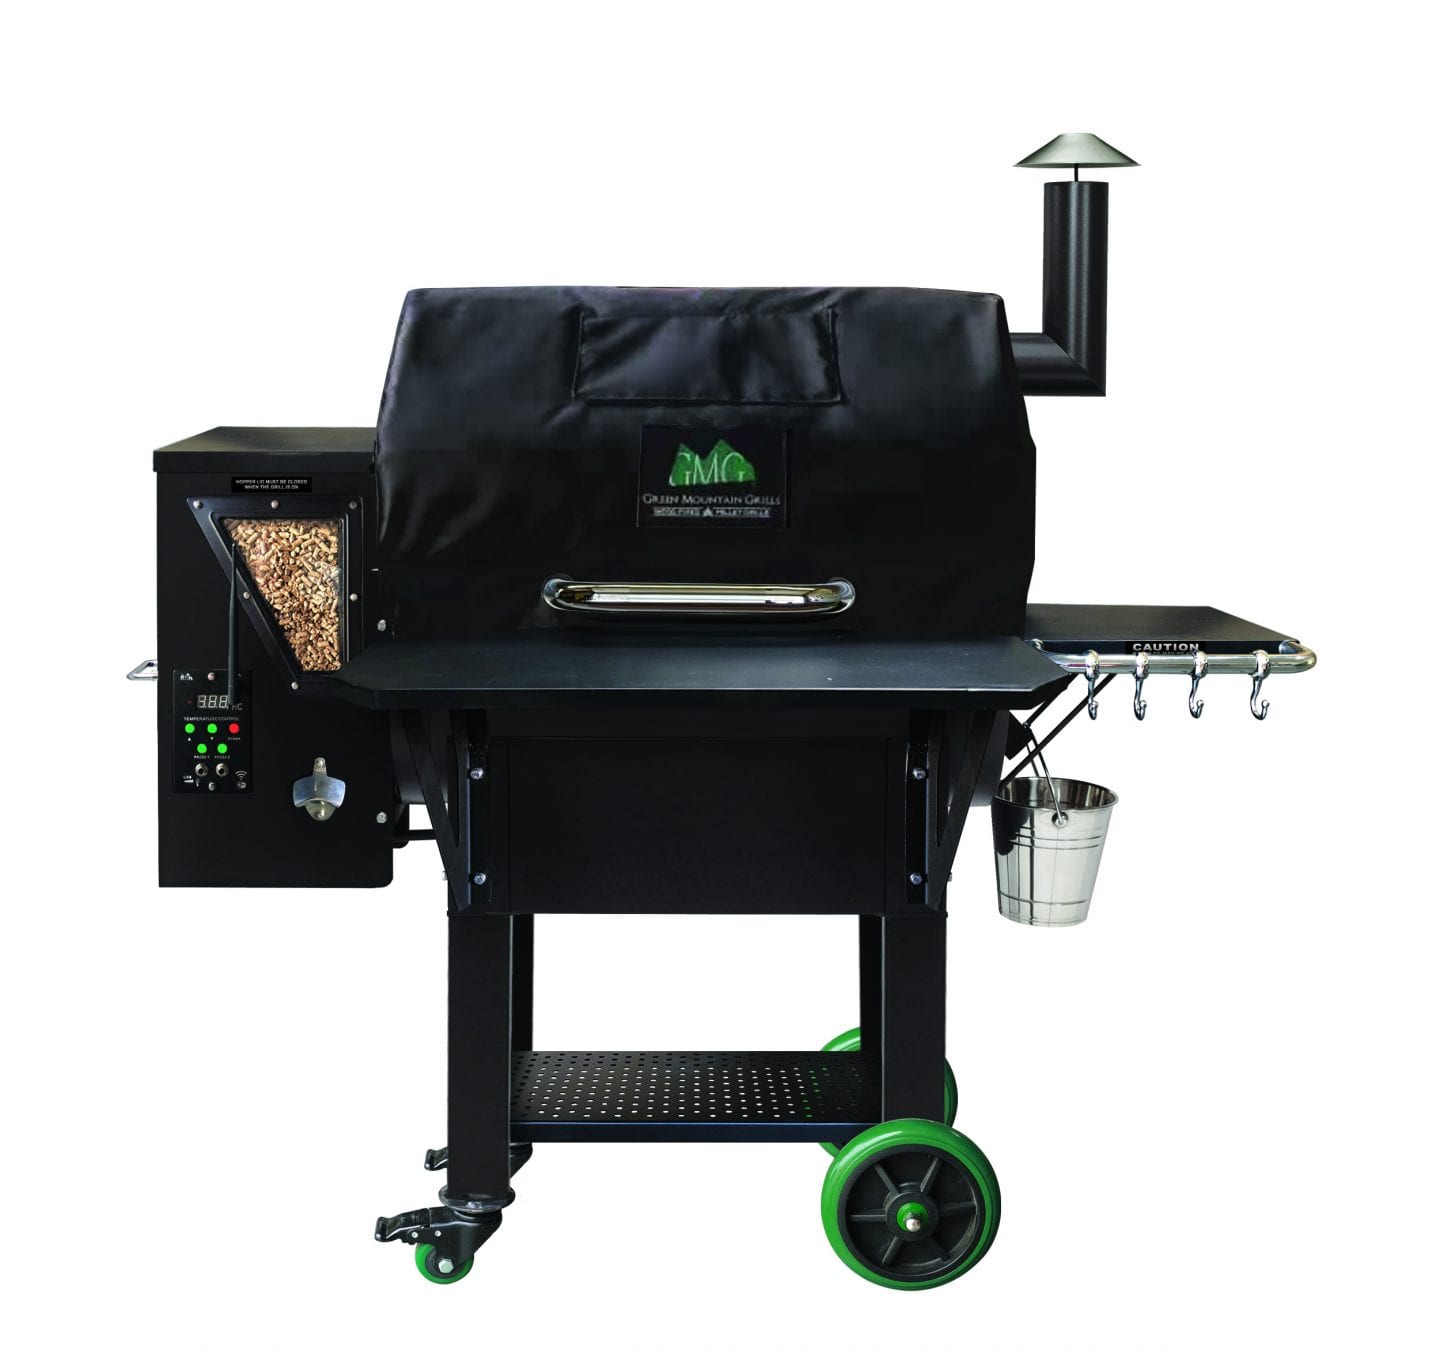 GMG Grill Thermal Blanket